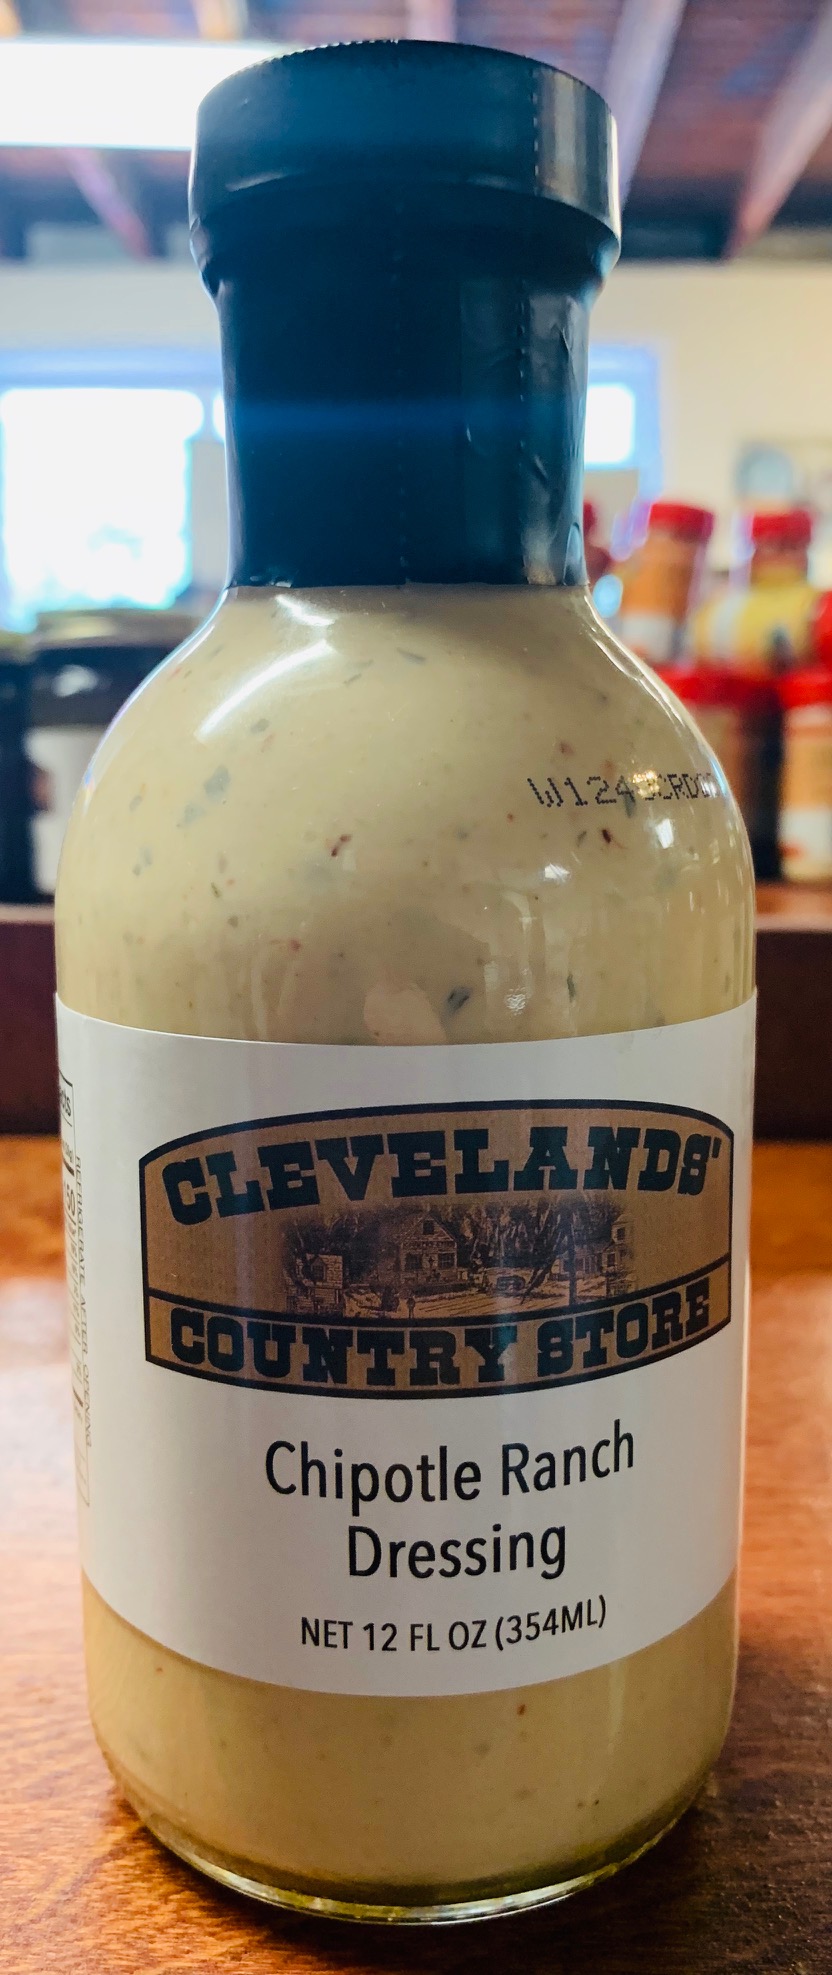 Chipotle Ranch Dressing – Clevelands’ Country Store